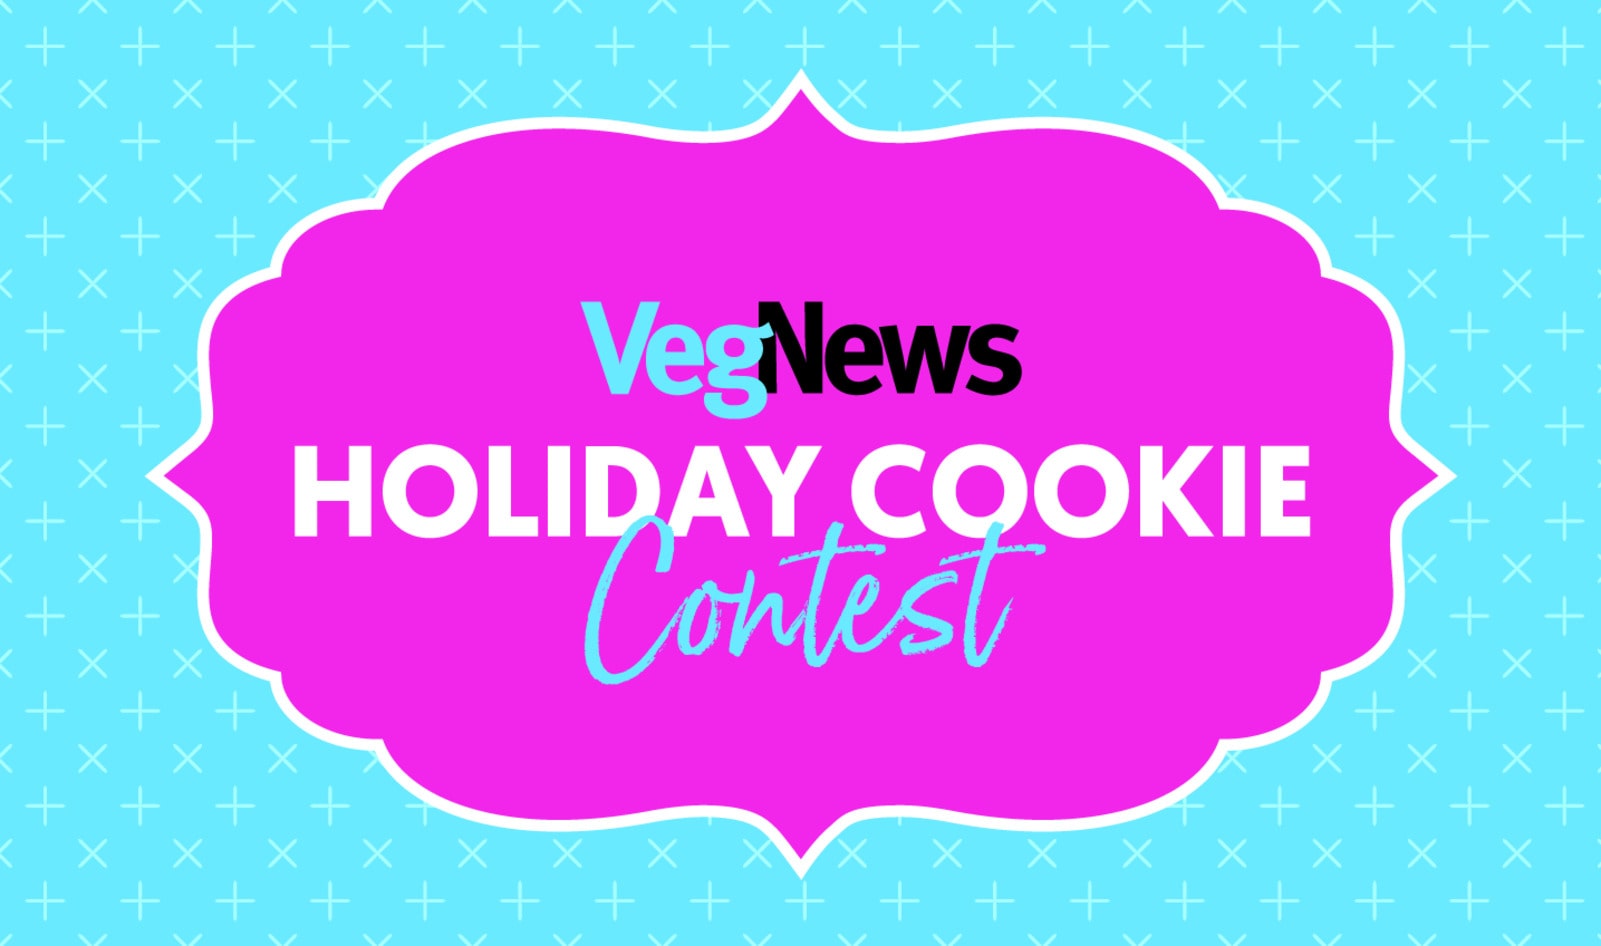 2018 VEGNEWS HOLIDAY COOKIE CONTEST WINNERS!